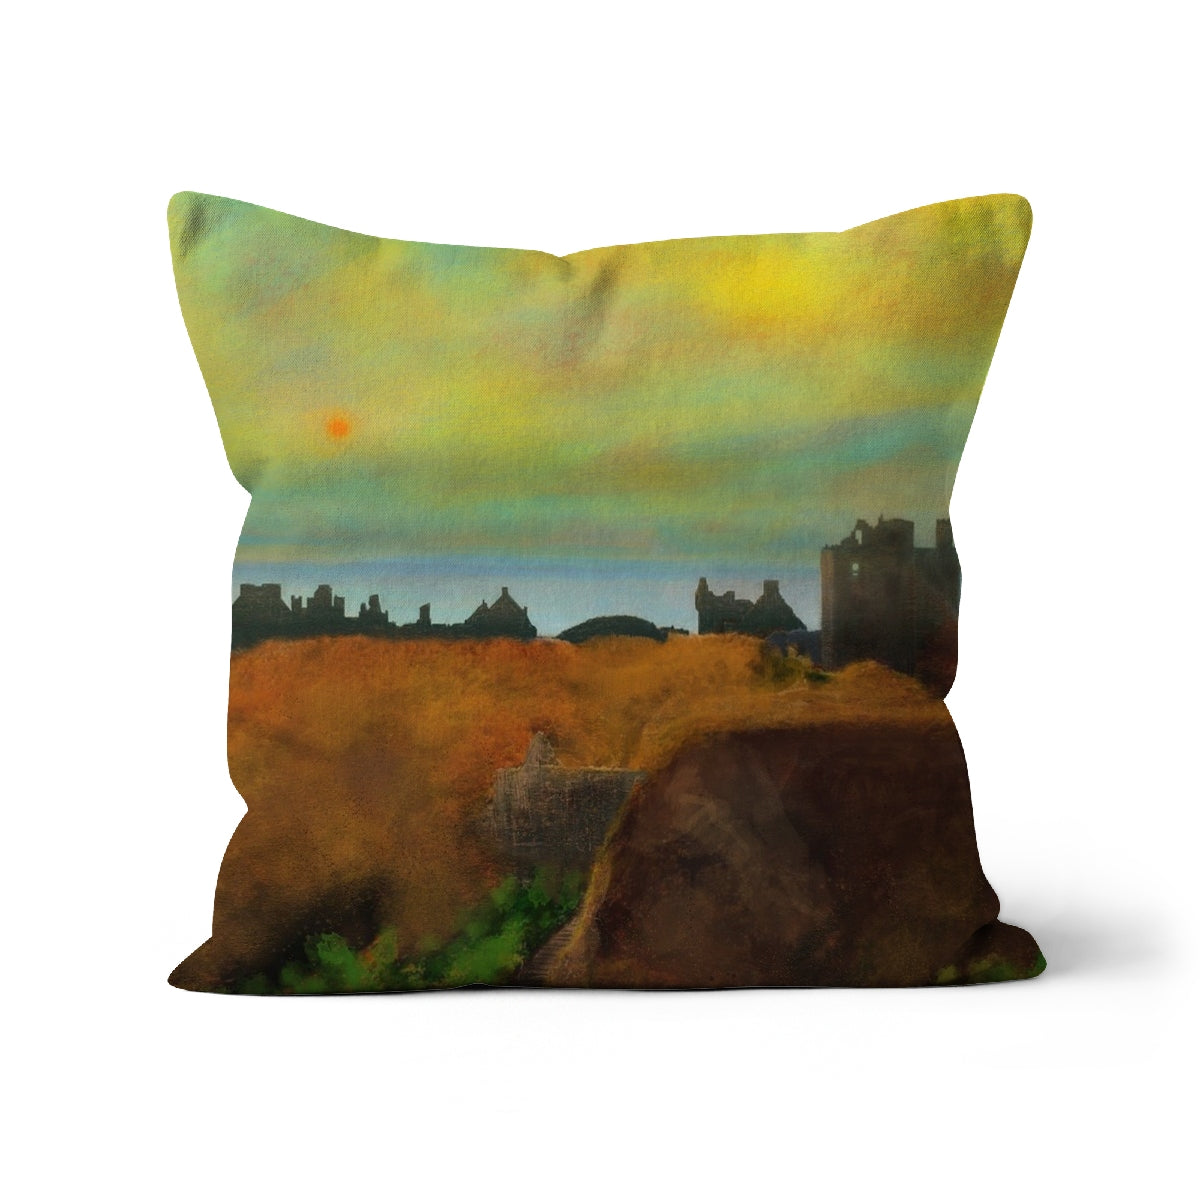 Dunnottar Castle Art Gifts Cushion-Cushions-Historic & Iconic Scotland Art Gallery-Canvas-12"x12"-Paintings, Prints, Homeware, Art Gifts From Scotland By Scottish Artist Kevin Hunter